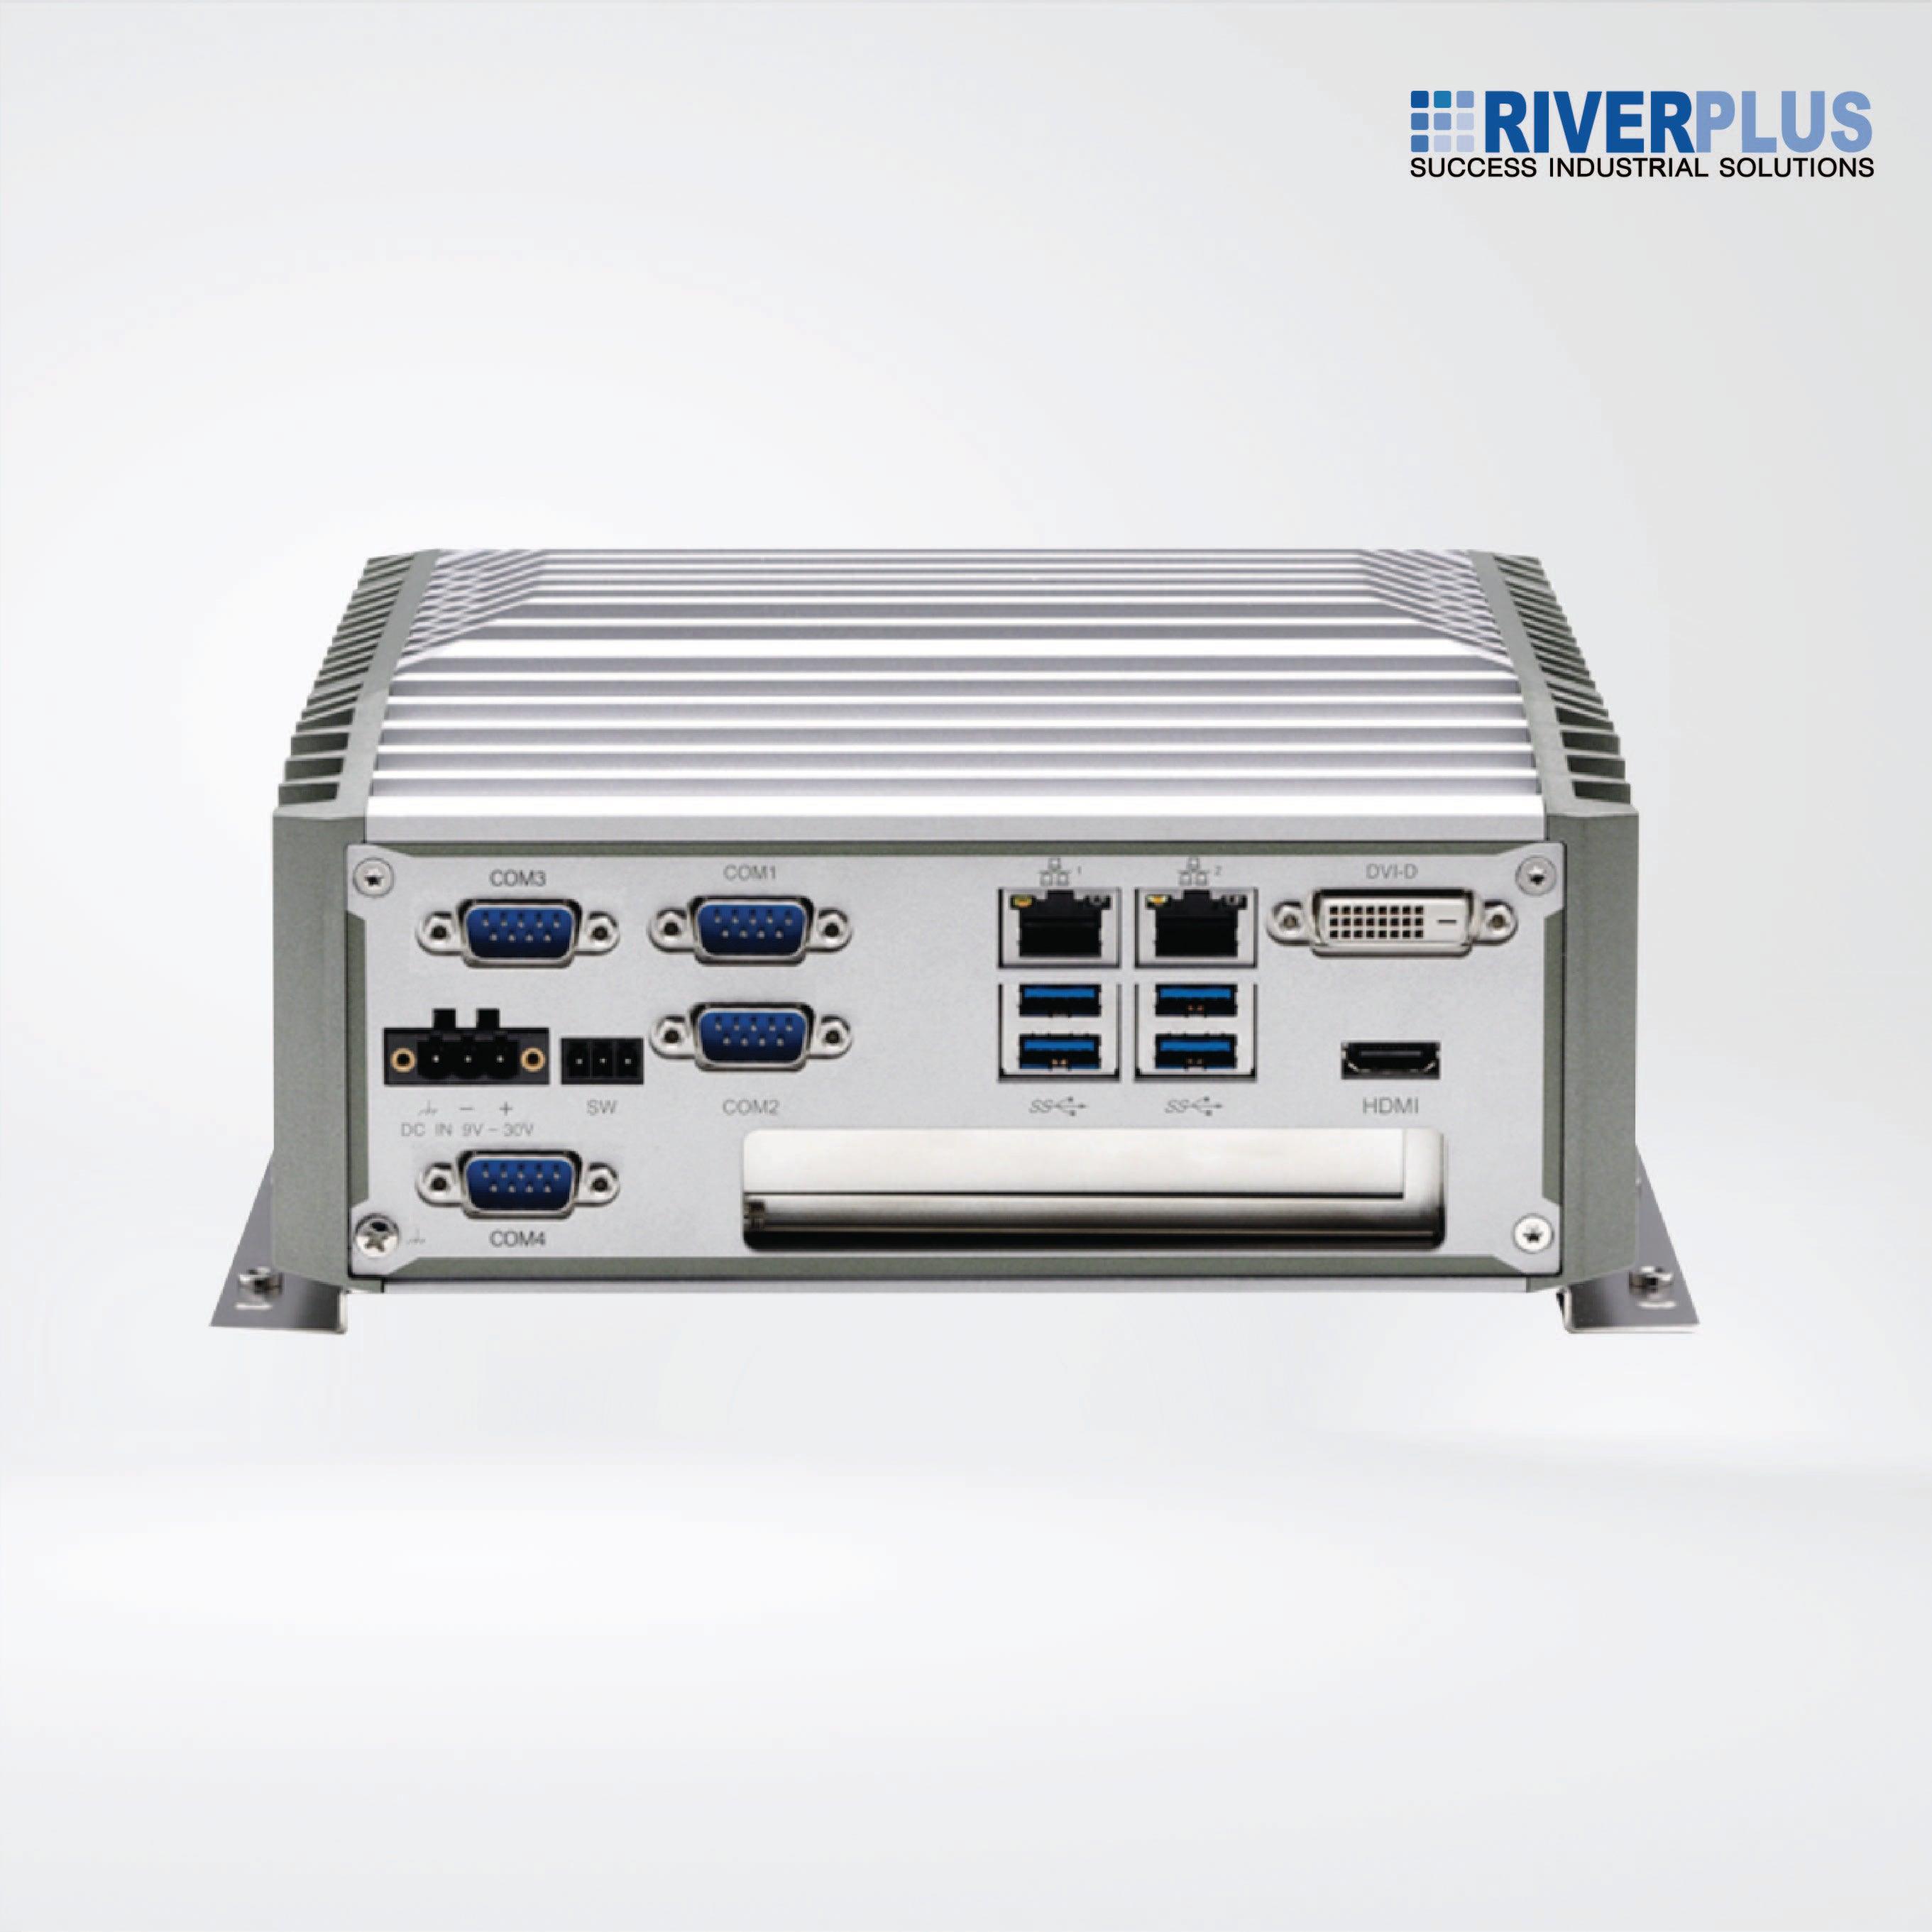 NISE 3900E-H310 8th Generation Intel® Core™ i7 Fanless System with Expansion - Riverplus